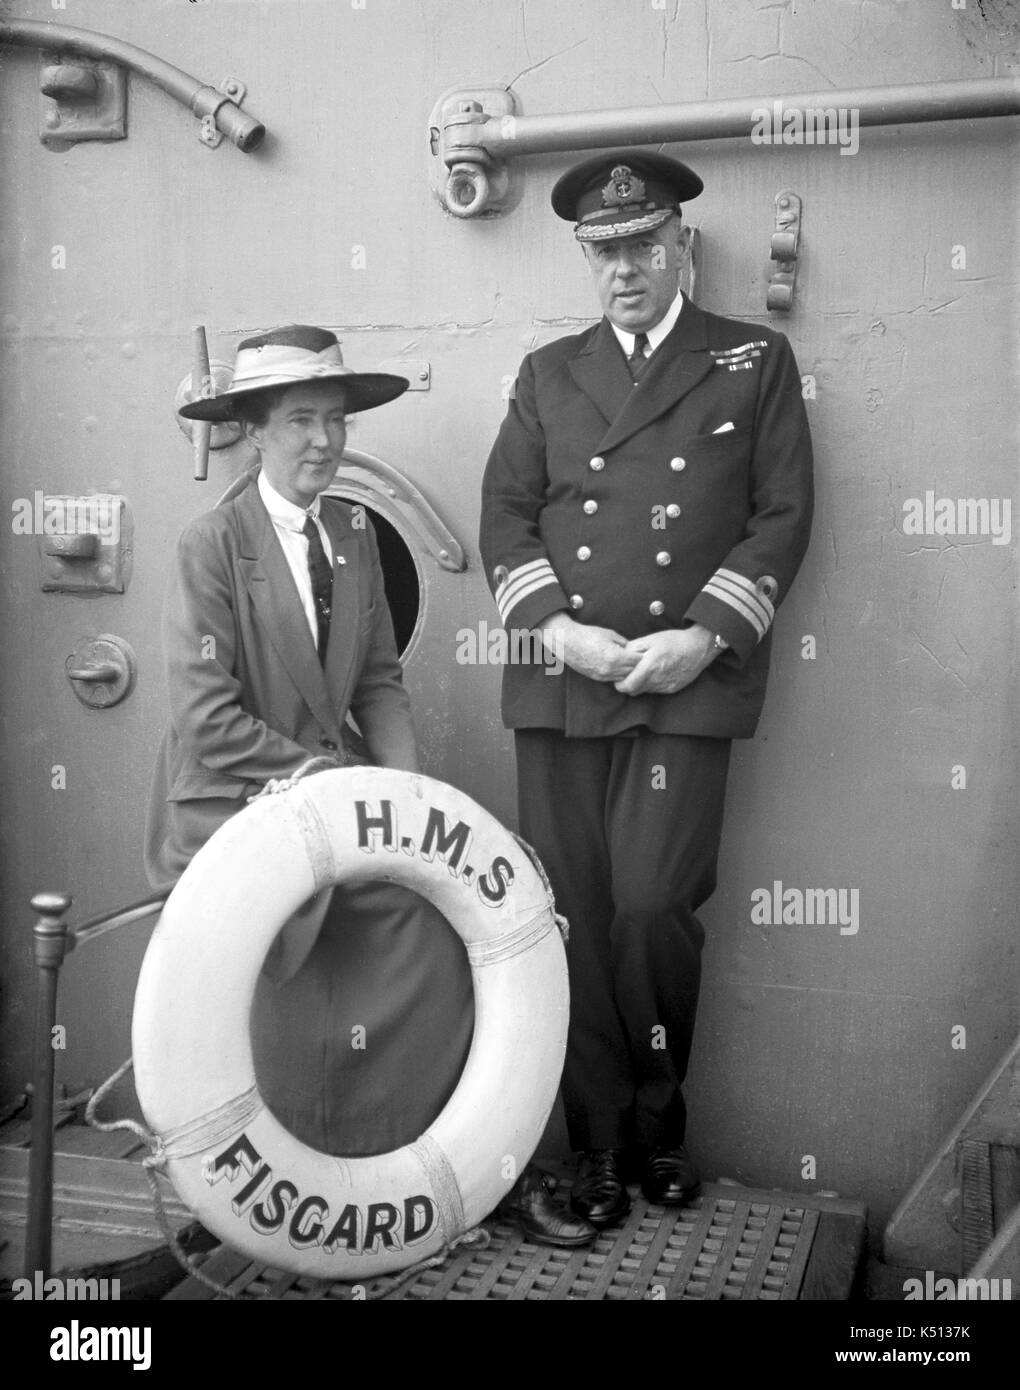 AJAXNETPHOTO. 1915 - 1932 (APPROX). LOCATION UNKNOWN. - HMS FISGARD PORTRAIT - A ROYAL NAVAL OFFICER AND A LADY IN A HAT POSE WITH THE SHIP'S LIFEBUOY. THE SHIP IS POSSIBLY THE DIADEM CLASS PROTECTED CRUISER HMS SPARTIATE RENAMED FISGARD IN 1915.  PHOTOGRAPHER:UNKNOWN © DIGITAL IMAGE COPYRIGHT AJAX VINTAGE PICTURE LIBRARY SOURCE: AJAX VINTAGE PICTURE LIBRARY COLLECTION REF:()AVL PEO HMS FISCARD 1902 01 Stock Photo